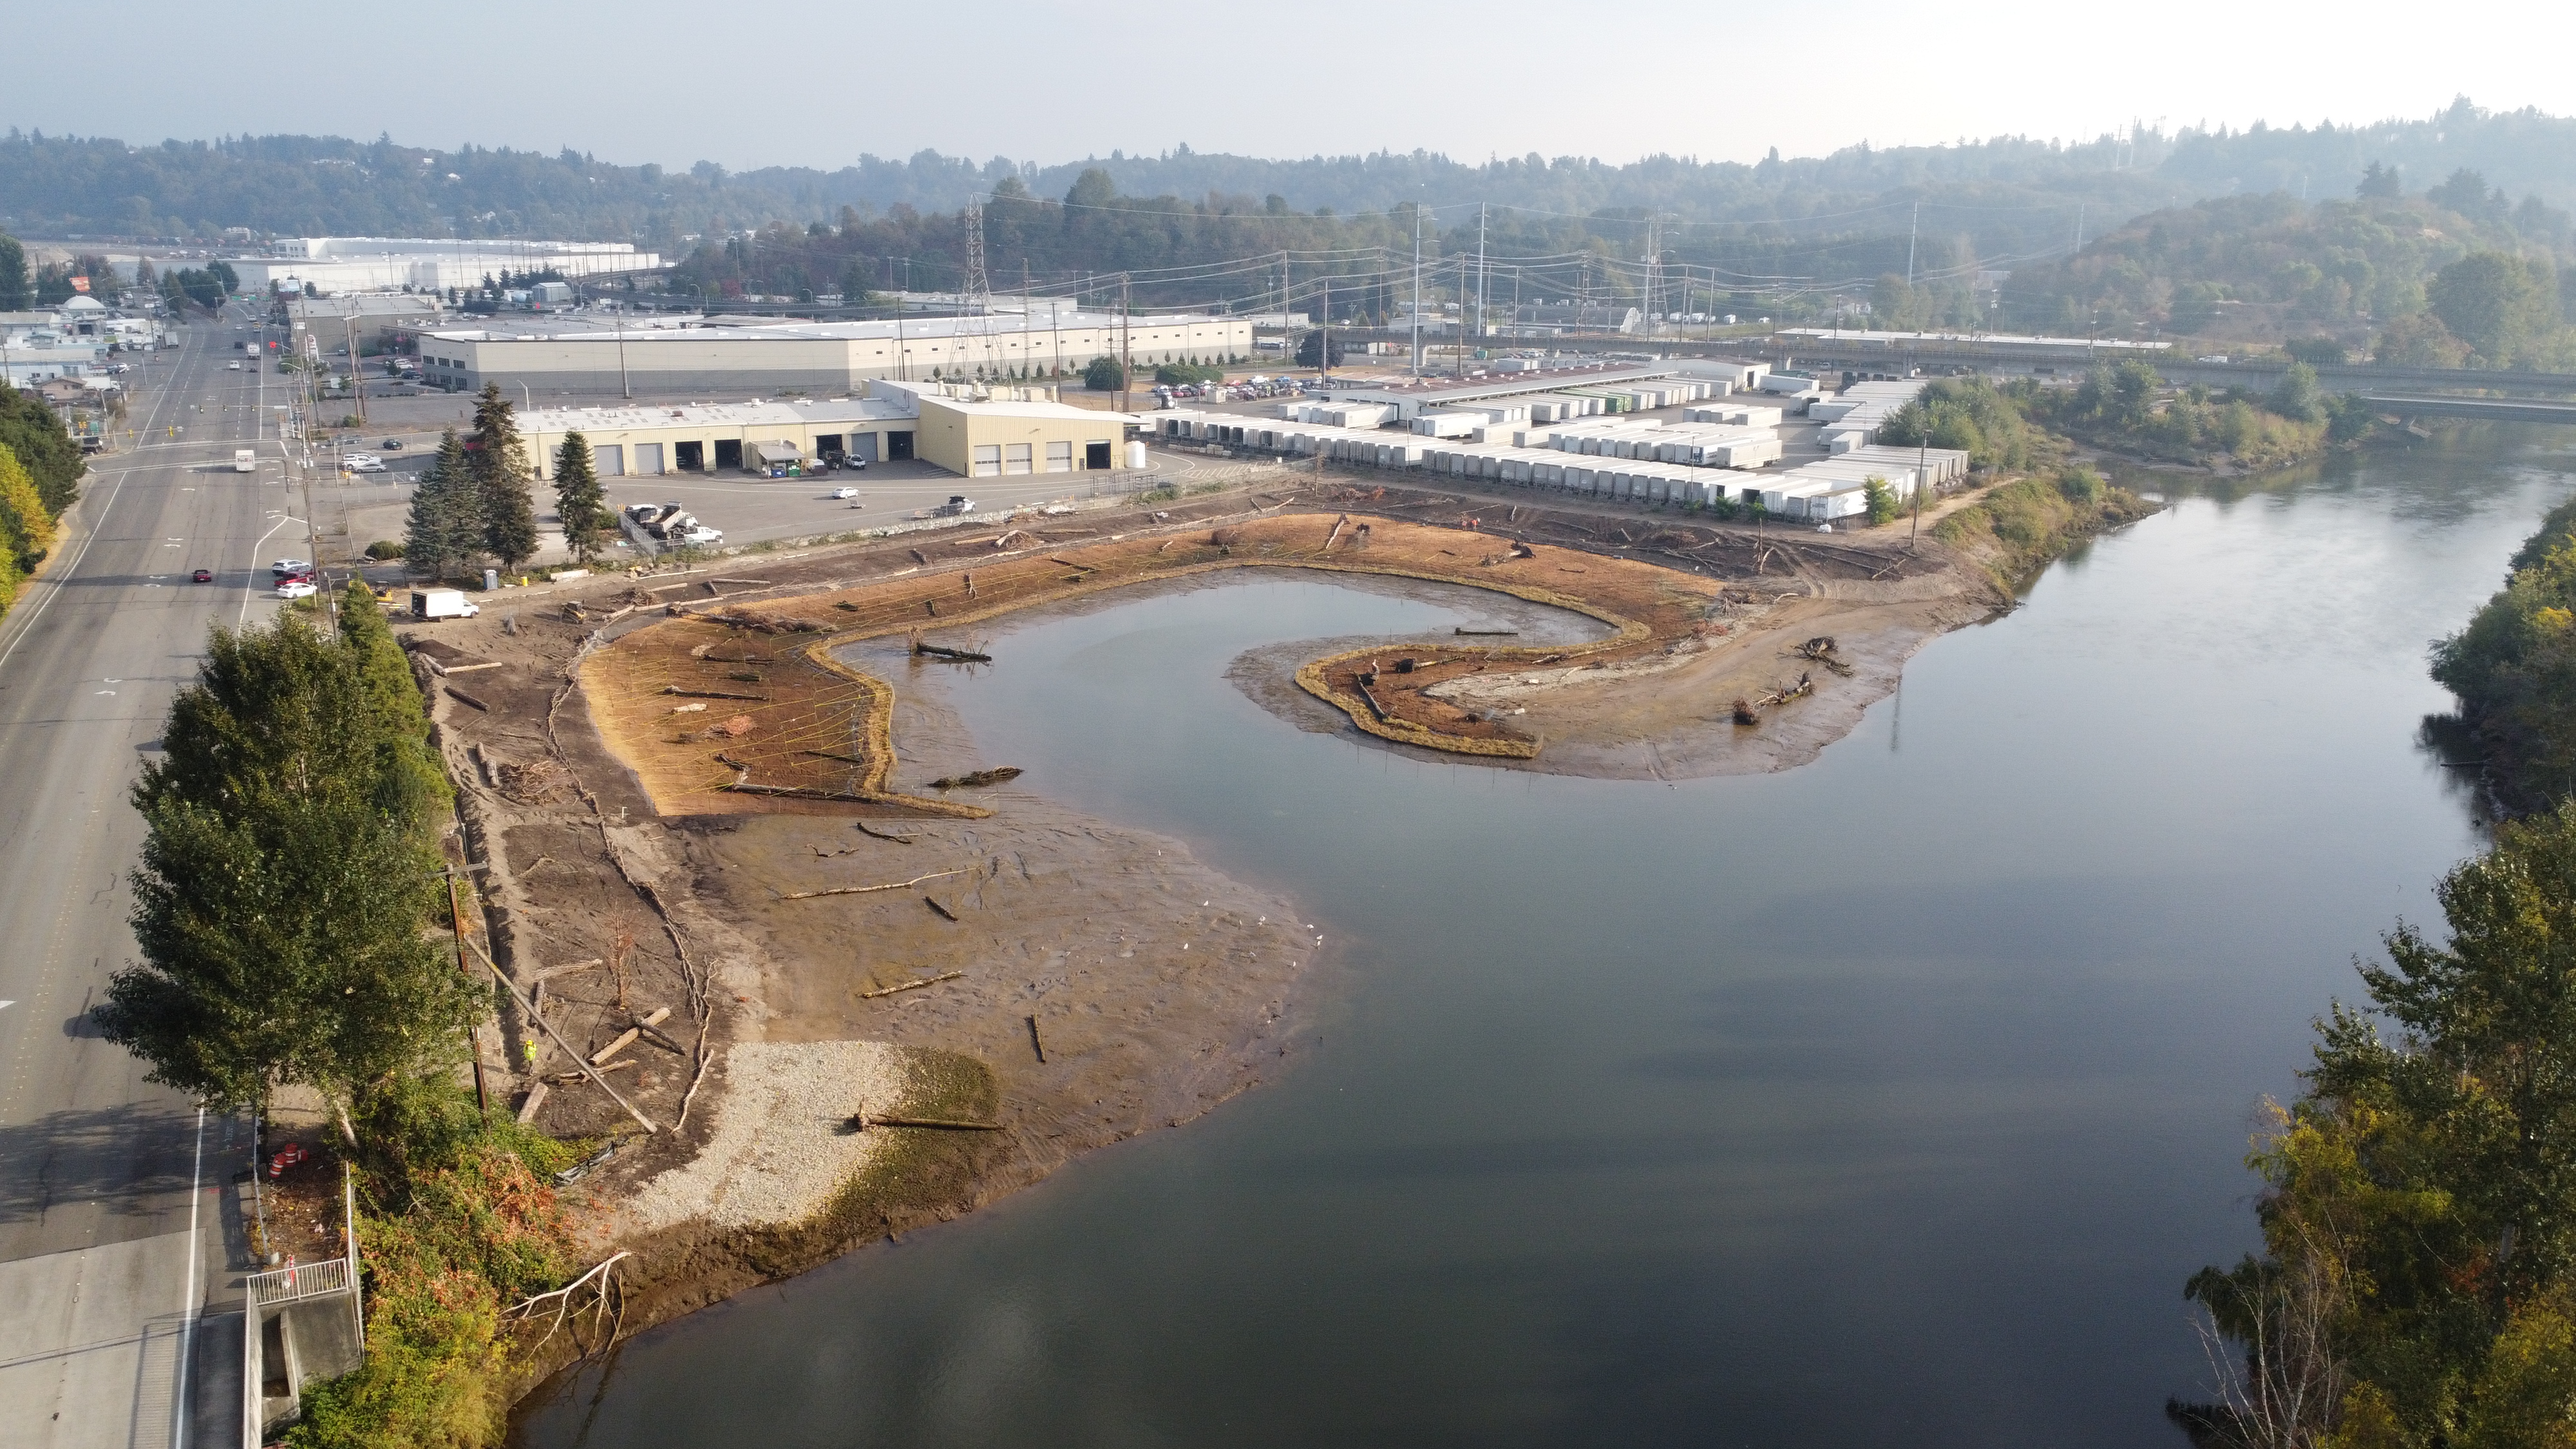 Drone photo of the Chinook Wind riparian wetland project site on the Duwamish River